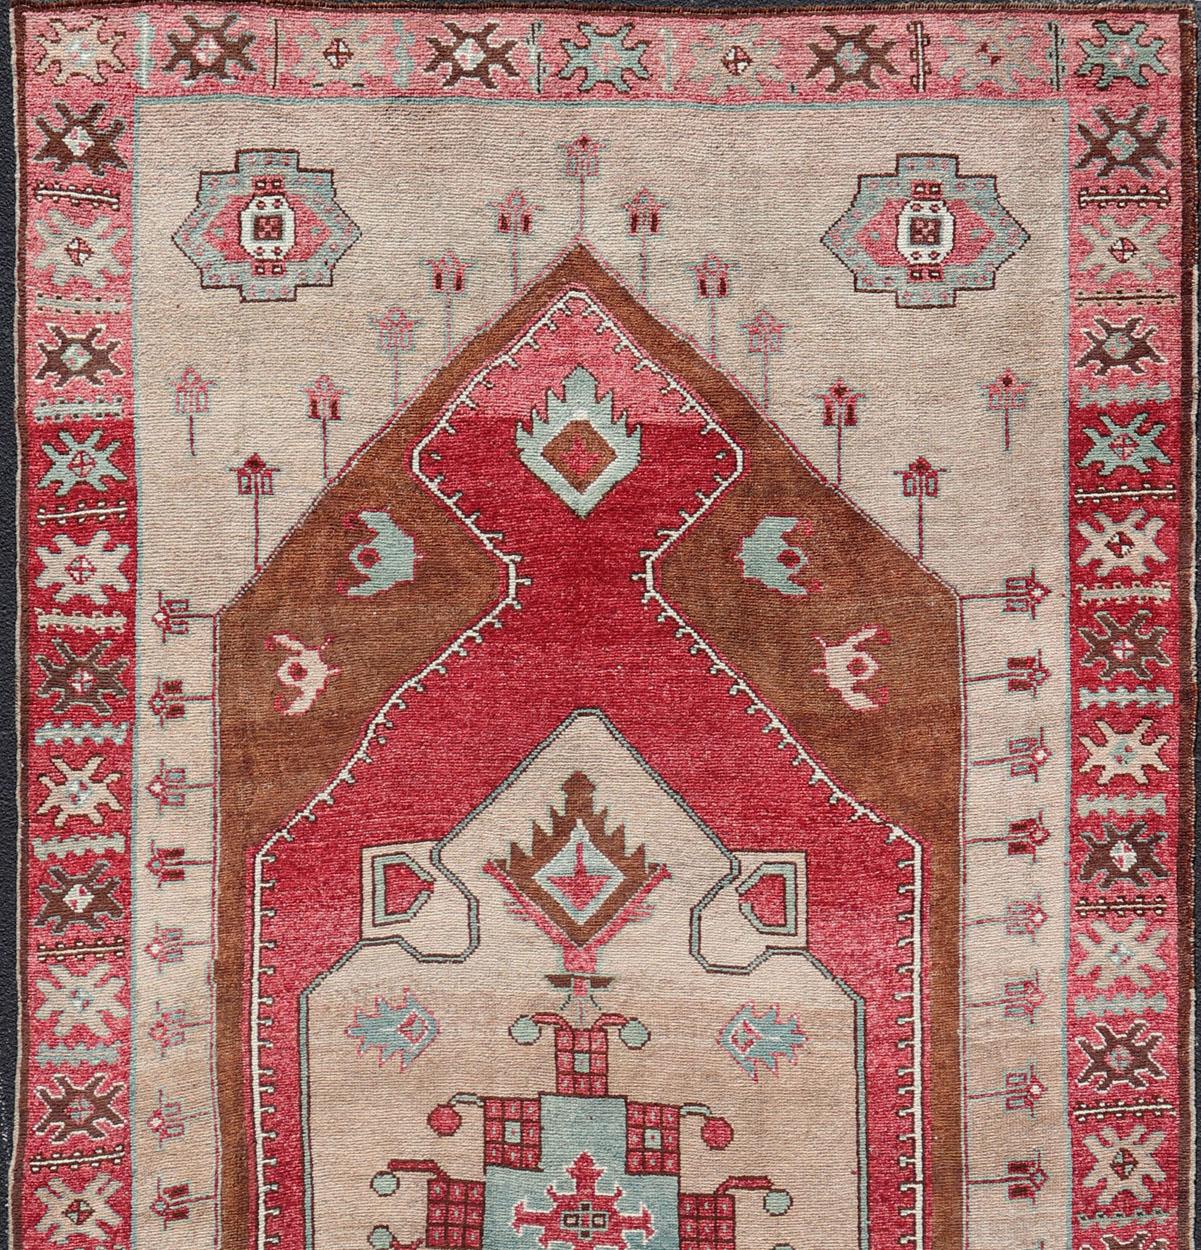 Vintage wide Gallery runner from Turkey with Medallion design in various tones of Red, light raspberry, taupe. and brown rug EN-179982, country of origin / type: Turkey / Kars, circa 1940

This beautiful vintage Turkish Kars gallery rug from 1940s